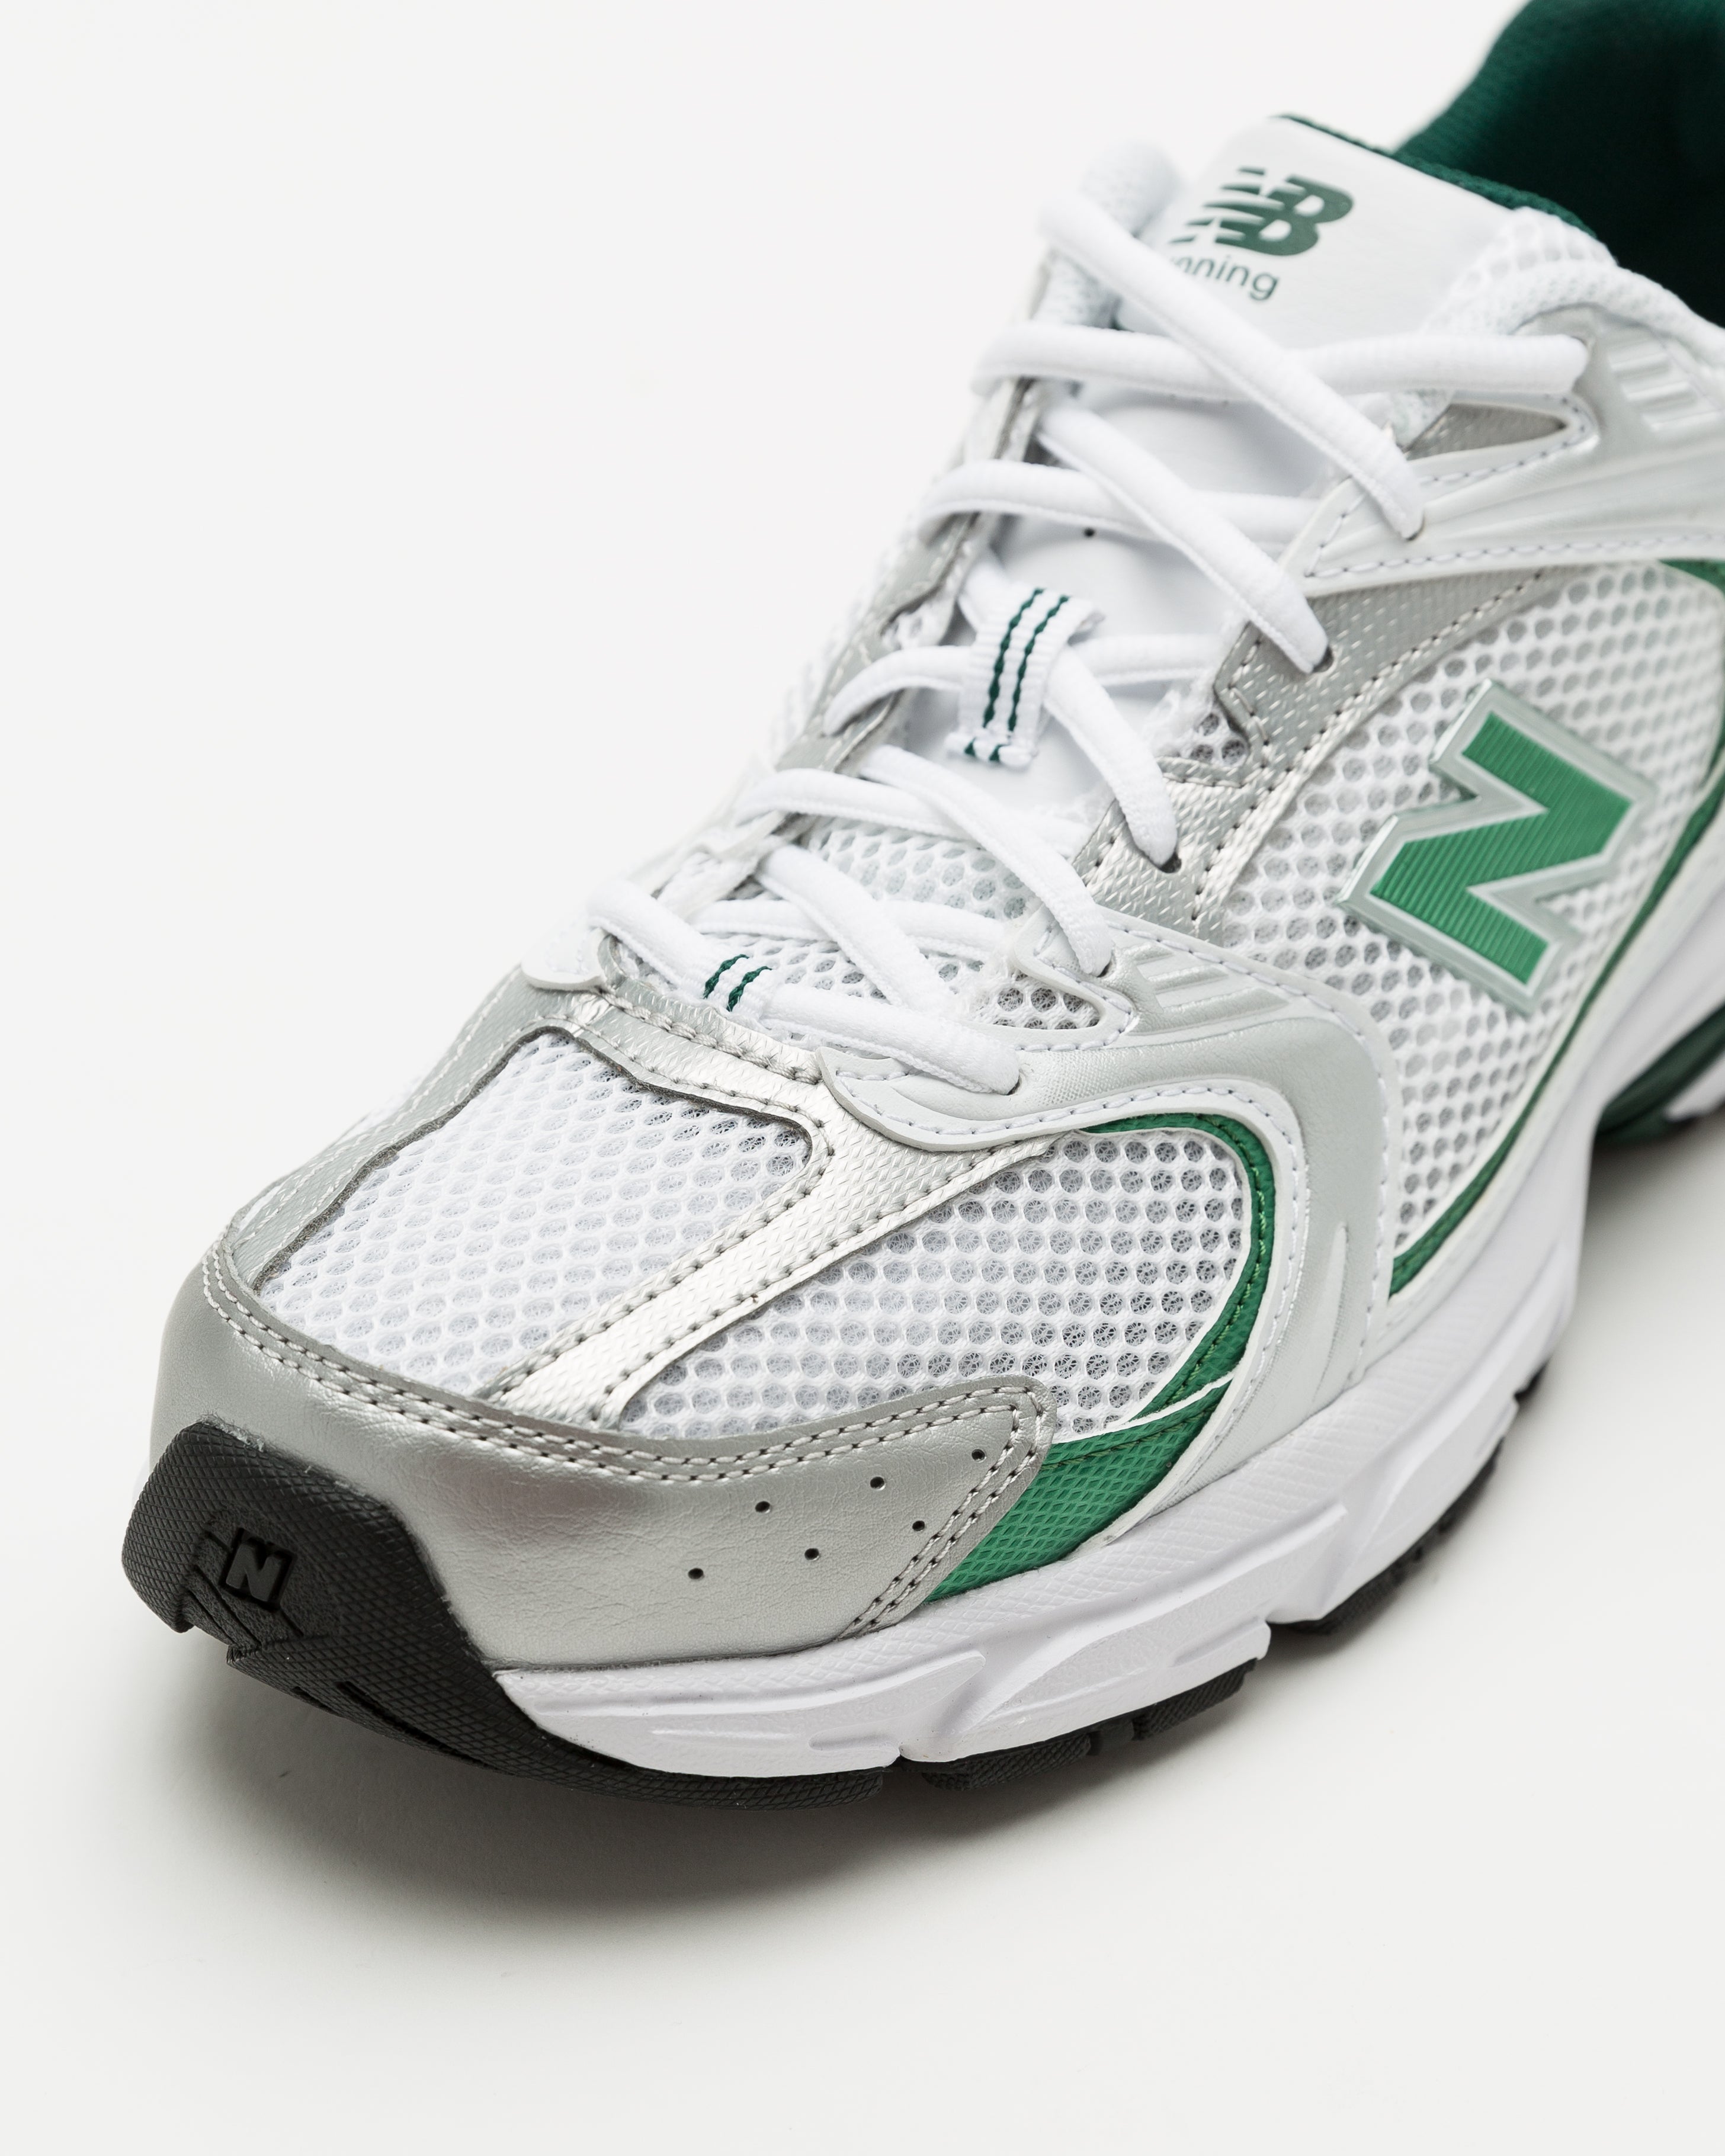 530 in White and Nightwatch Green